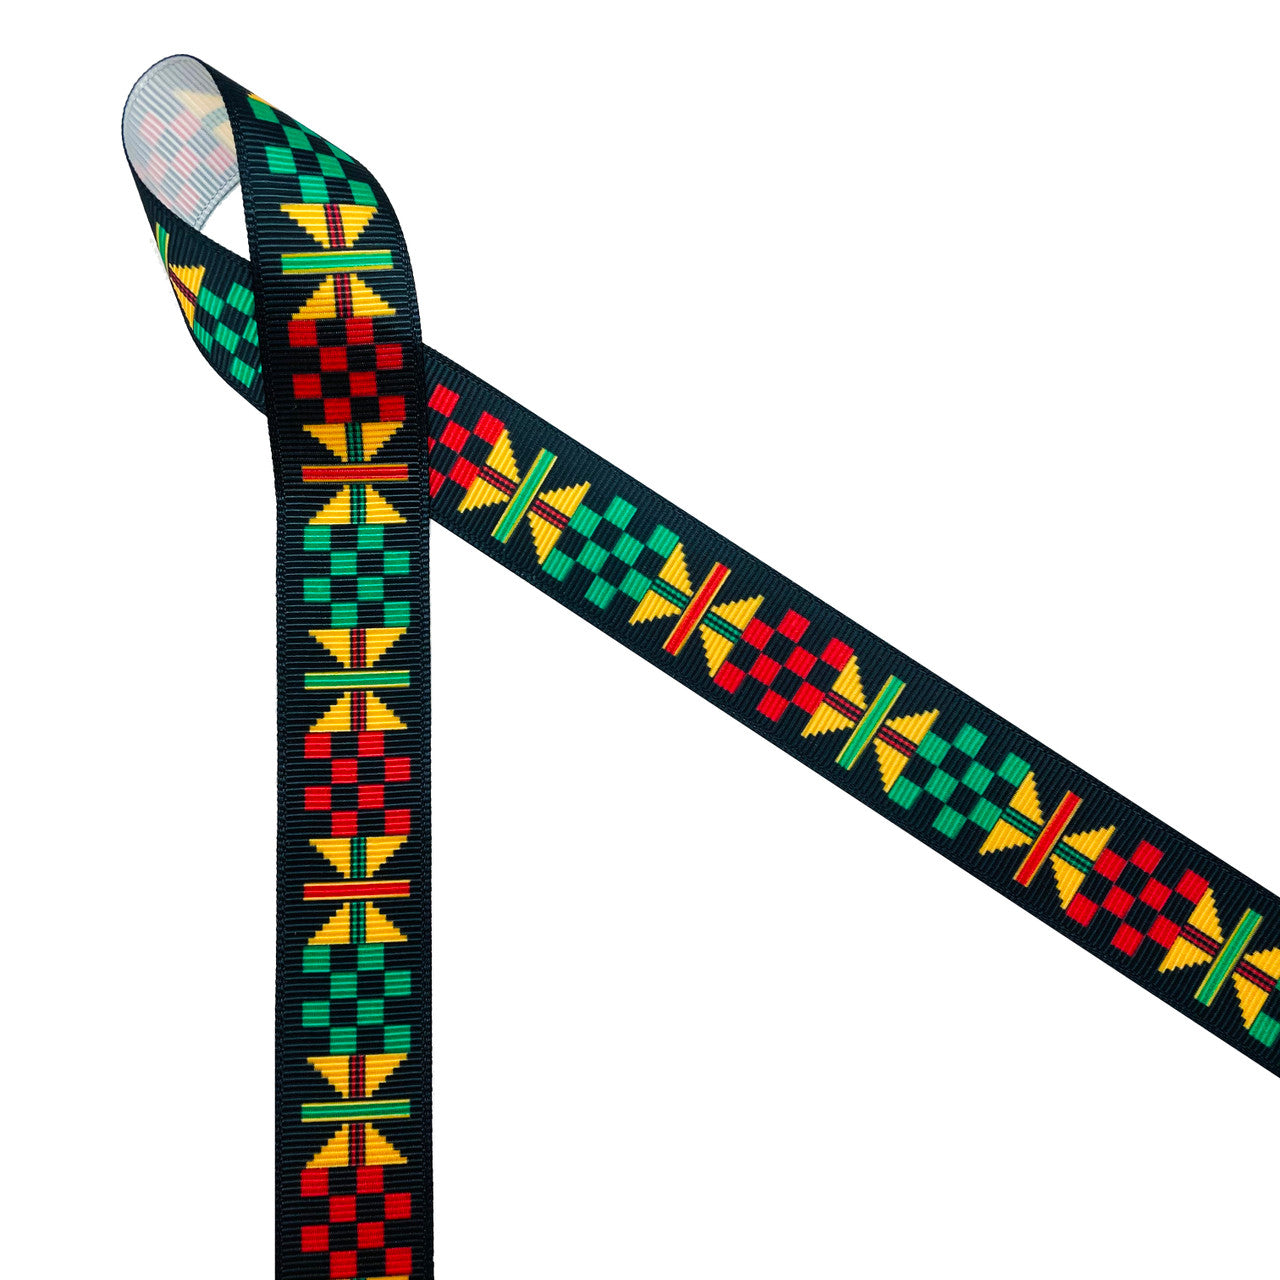 Ankara Kente African design in traditional colors of yellow, green, red and black printed on 7/8" white grosgrain ribbon is an ideal ribbon for hair bows, headbands, sewing projects, crafts and festivals. All our ribbons are designed and printed in the USA